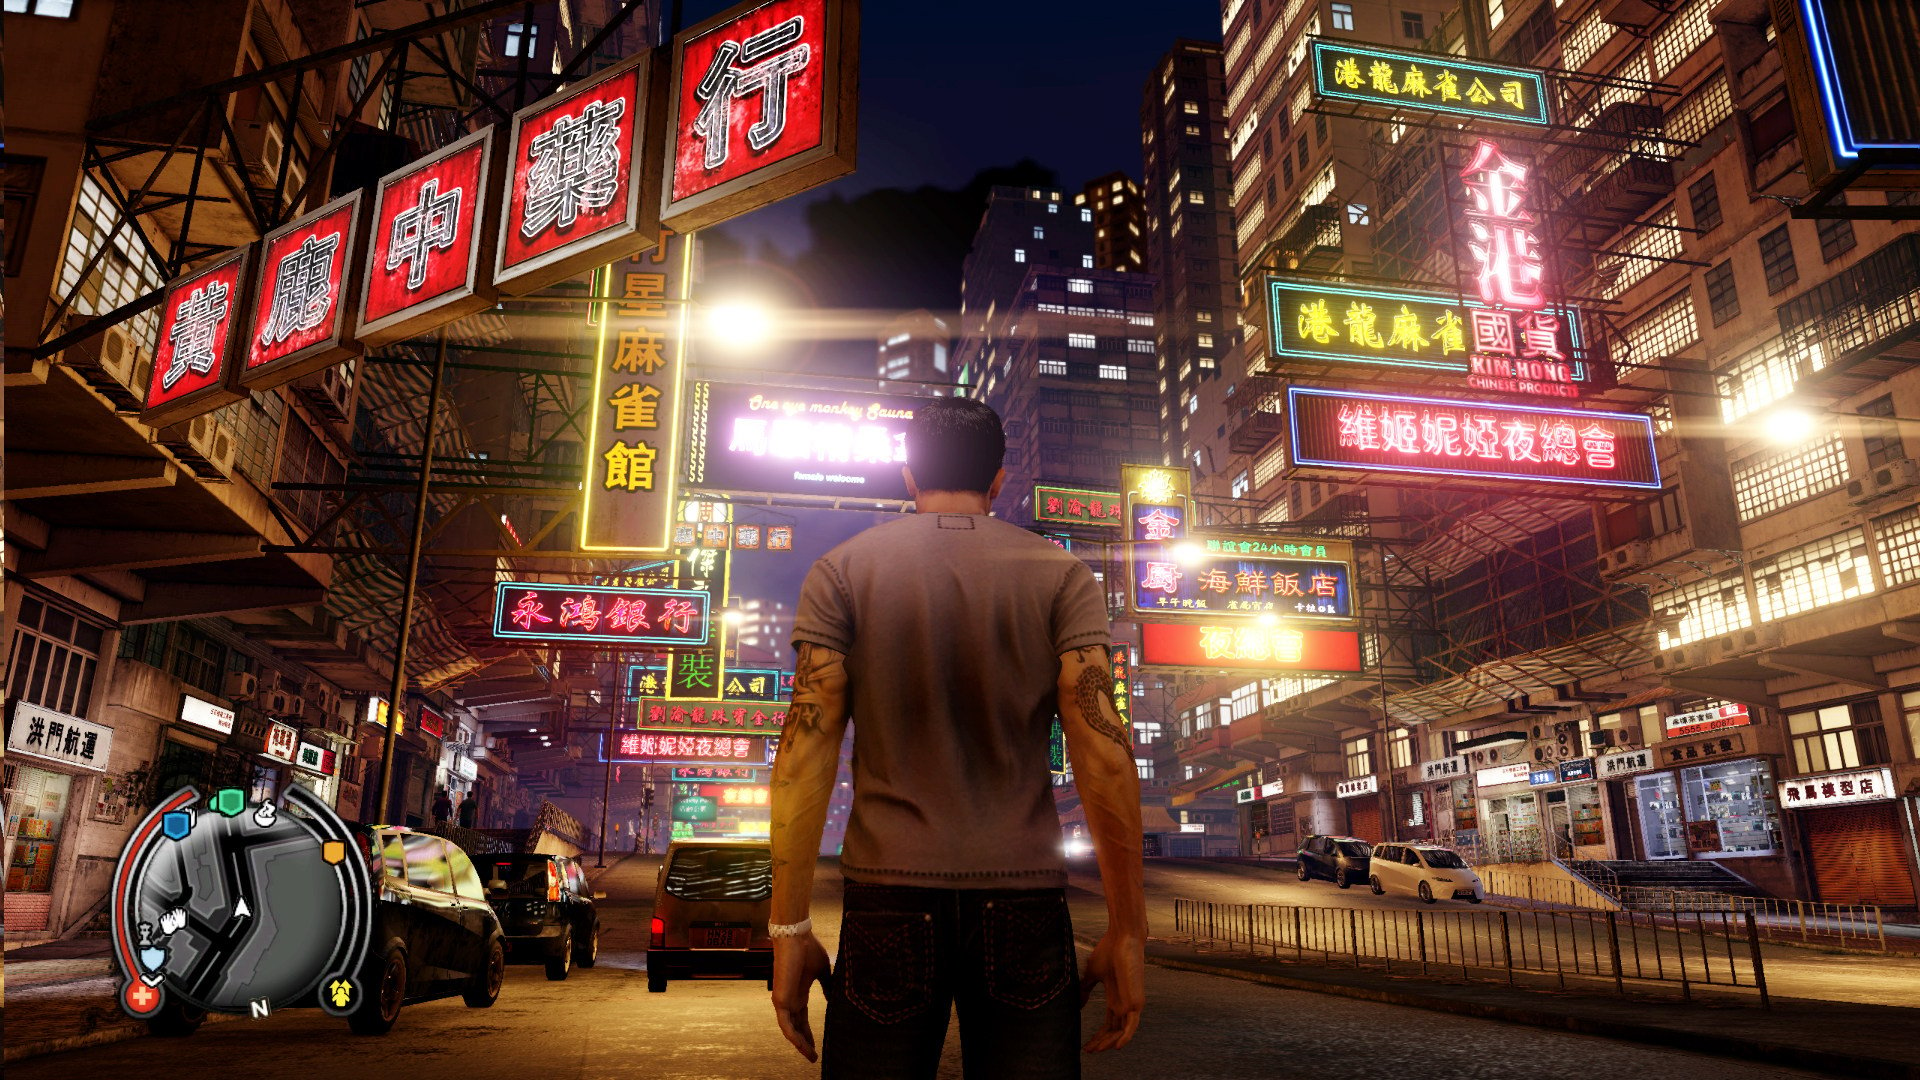 A still from Sleeping Dogs, one of the many games set in or inspired by Hong Kong. Others include one that has been called “the world’s worst video game”.